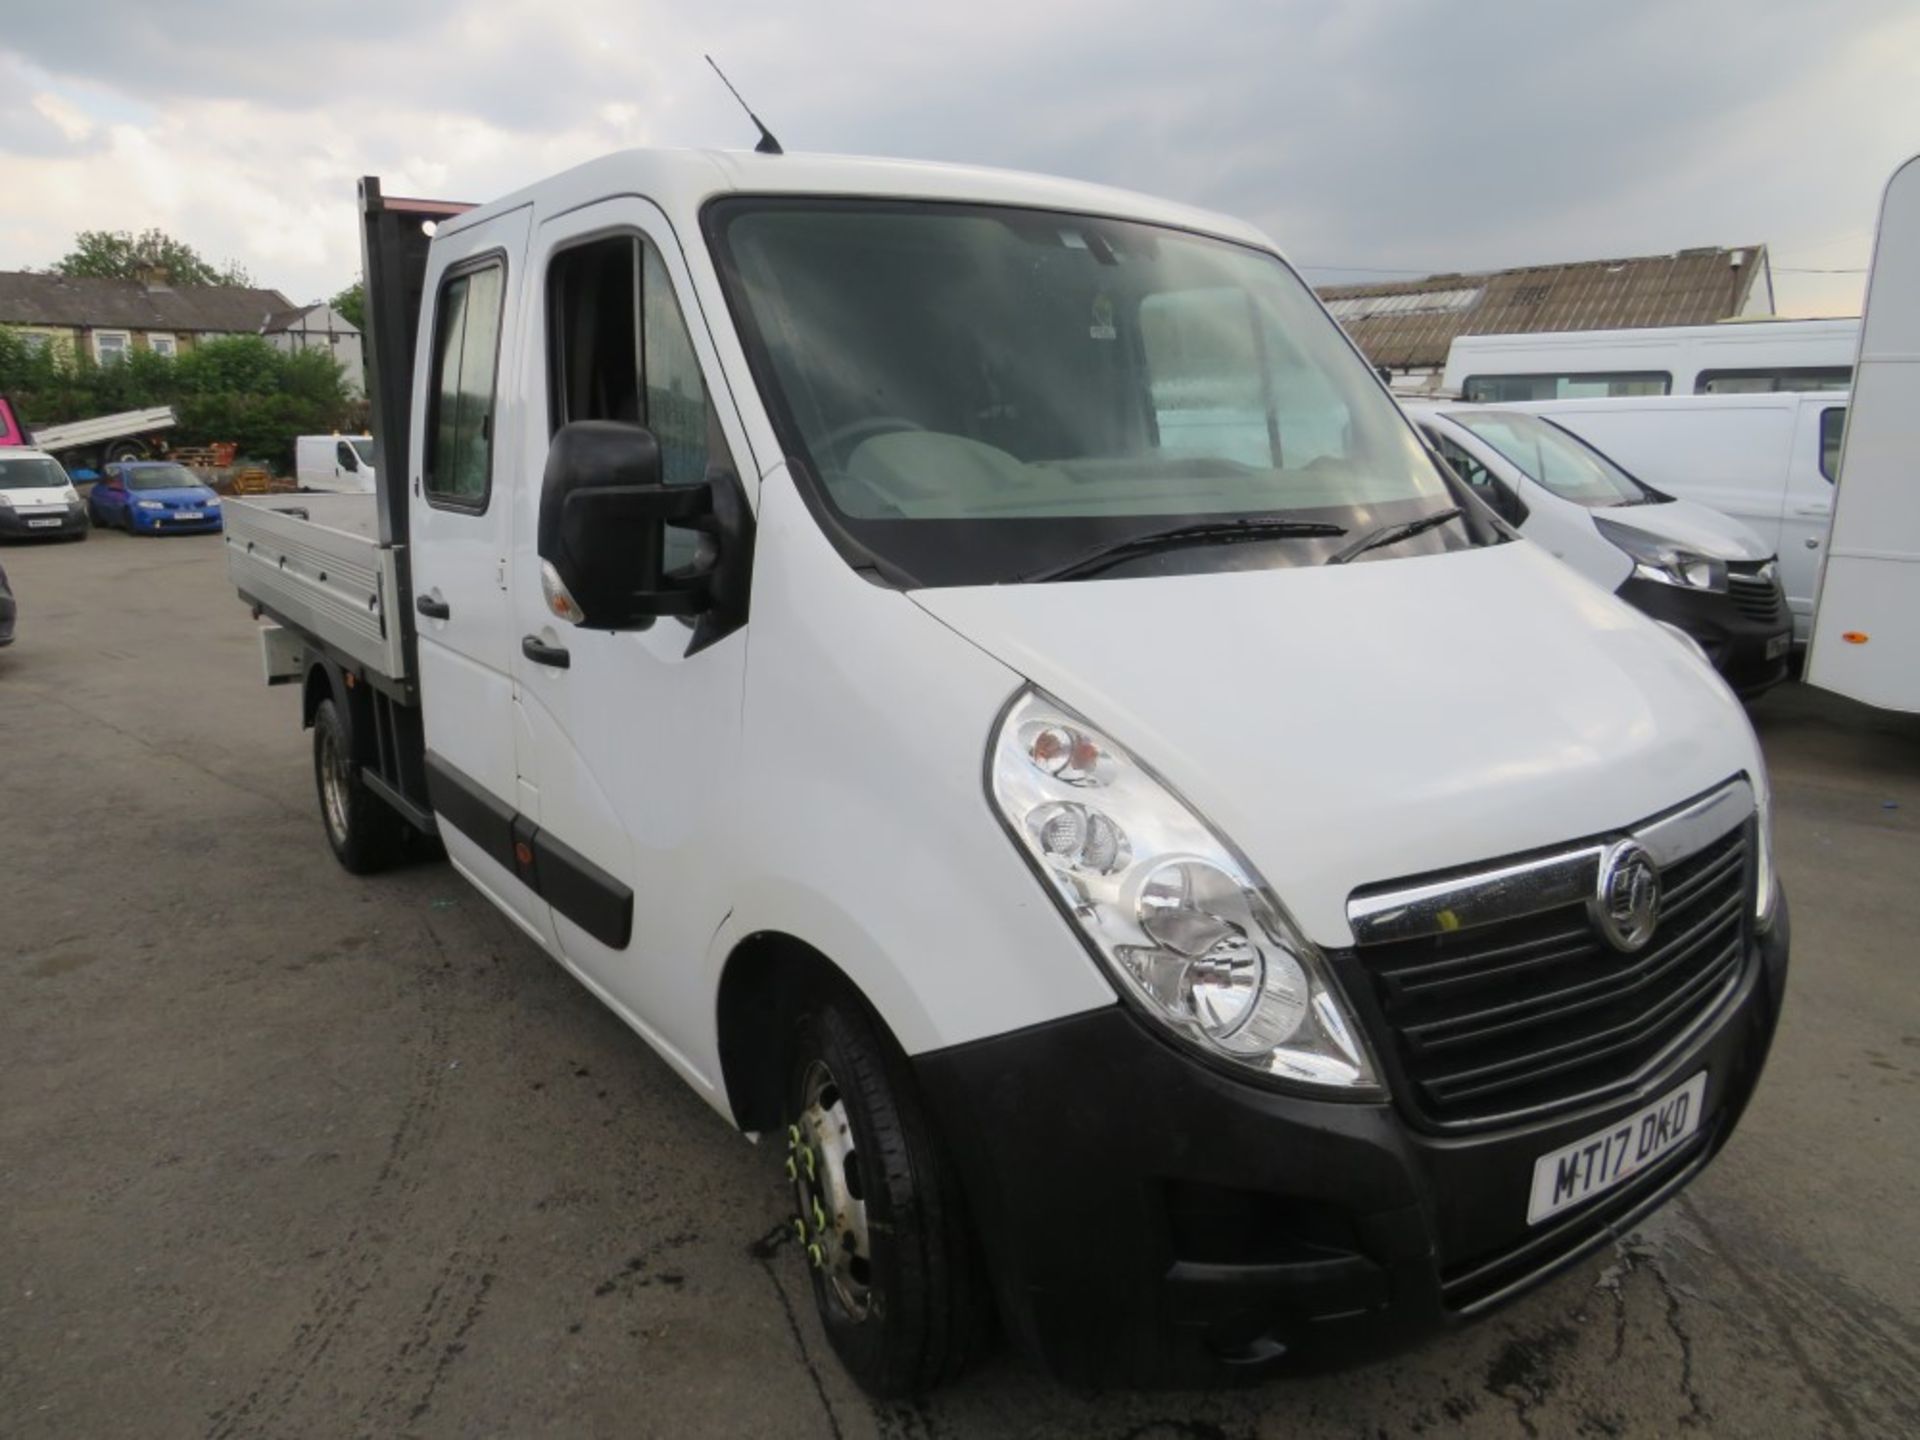 17 reg VAUXHALL MOVANO R3500 CDTI DROPSIDE - SELLING DUE TO IRON FILING FOUND IN OIL (DIRECT ELECTR